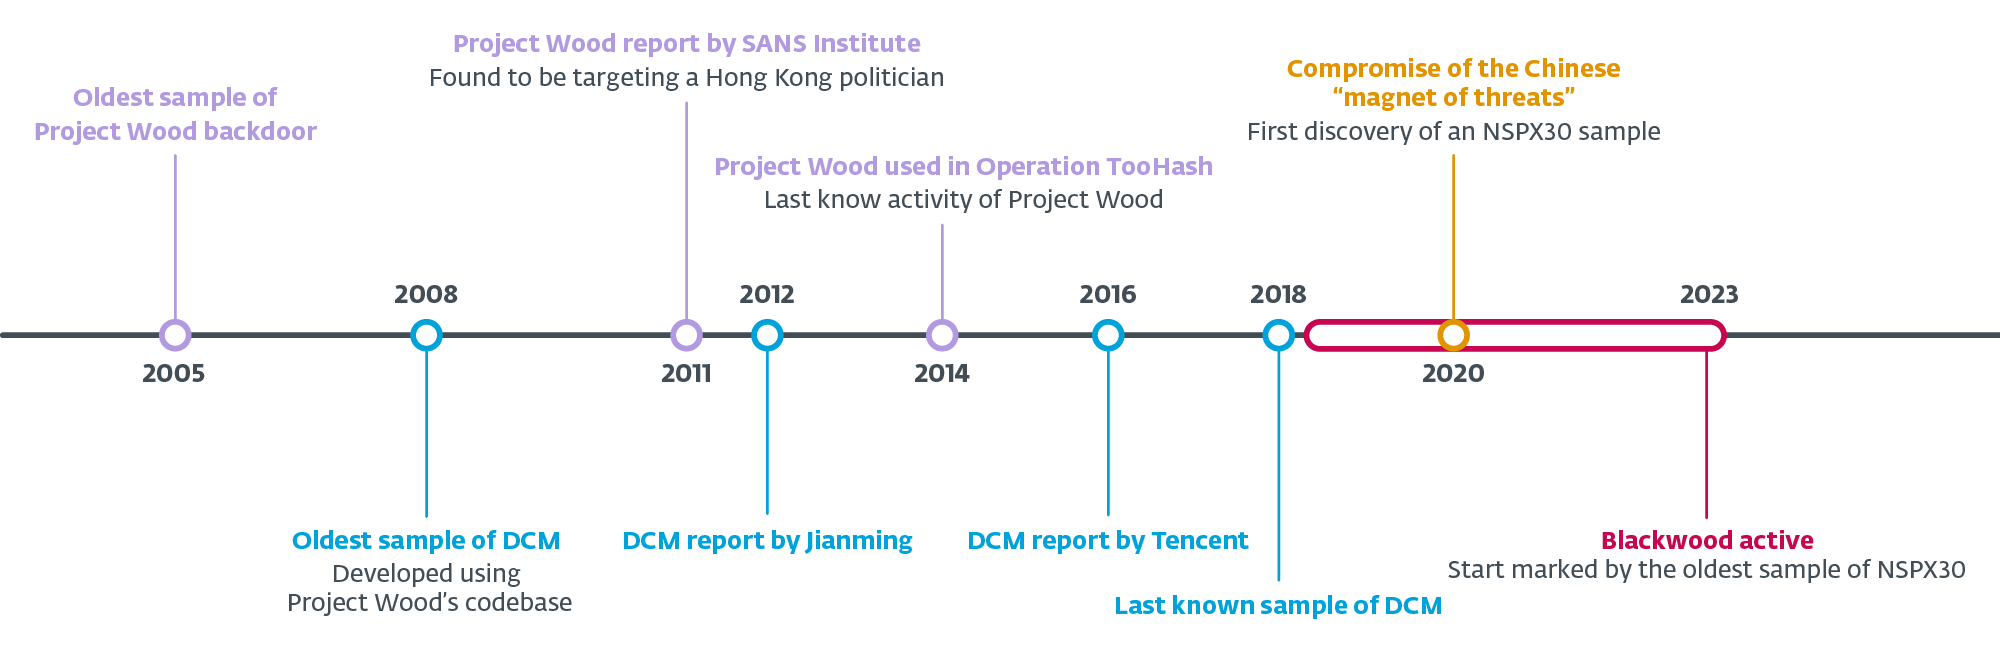 Figure 2. Timeline of major variants of Project Wood, DCM, and NSPX30